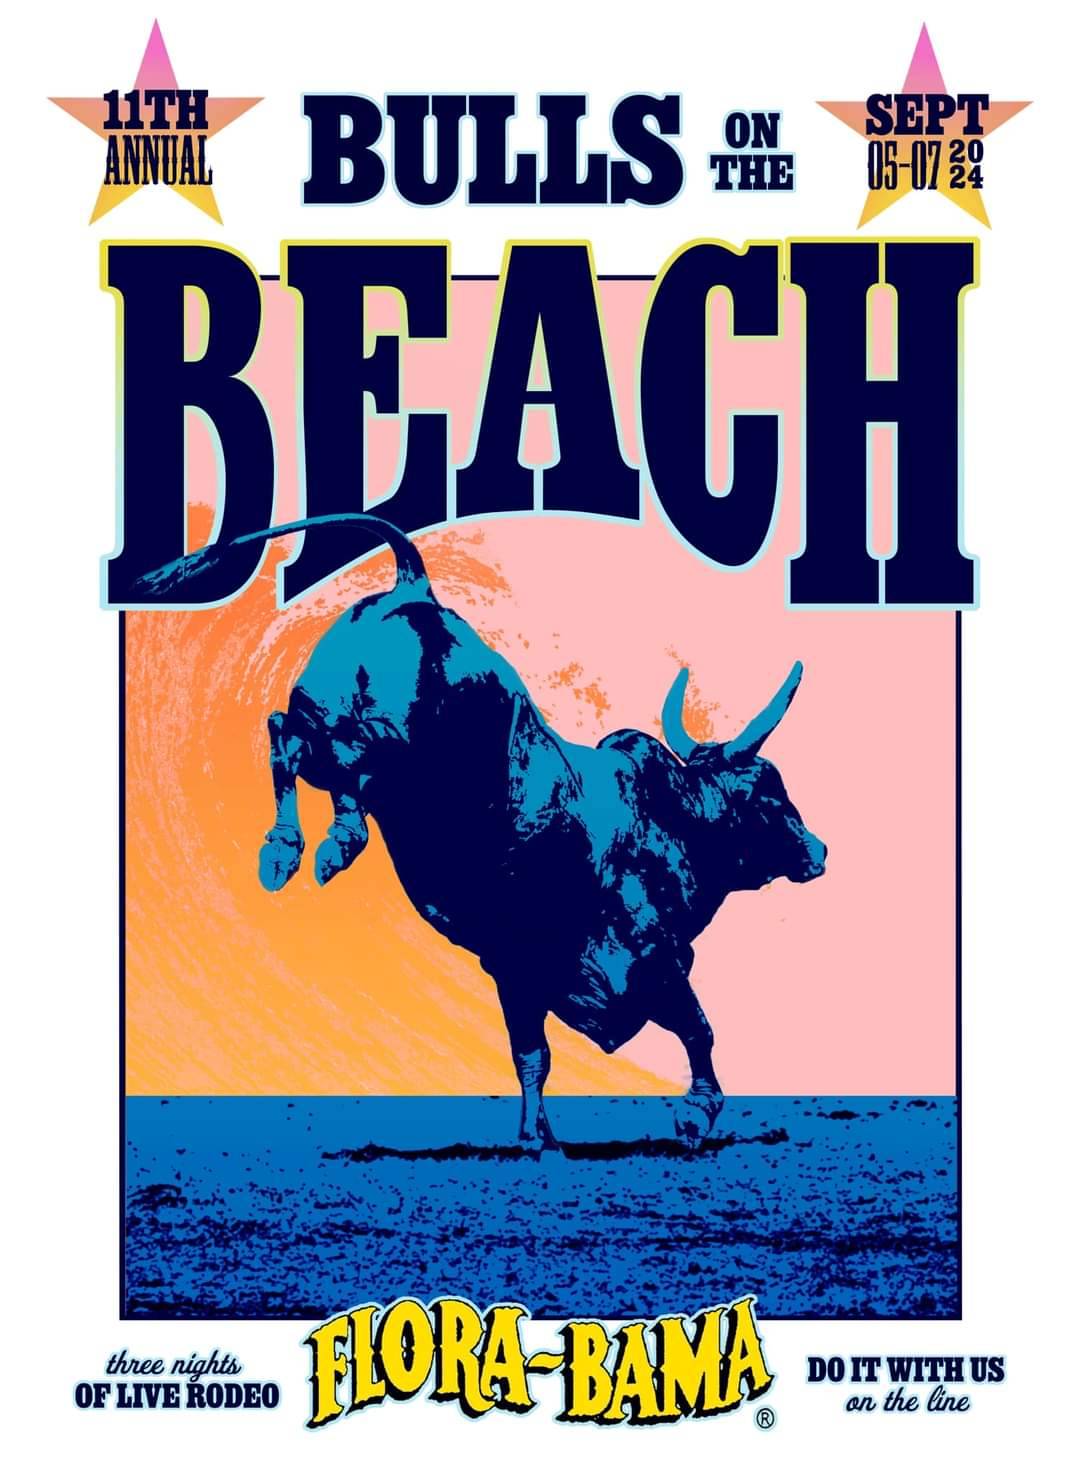 11th Annual Bulls on the Beach at Flora-Bama on Sept 5-7 2024 - 3R Rodeo Productions